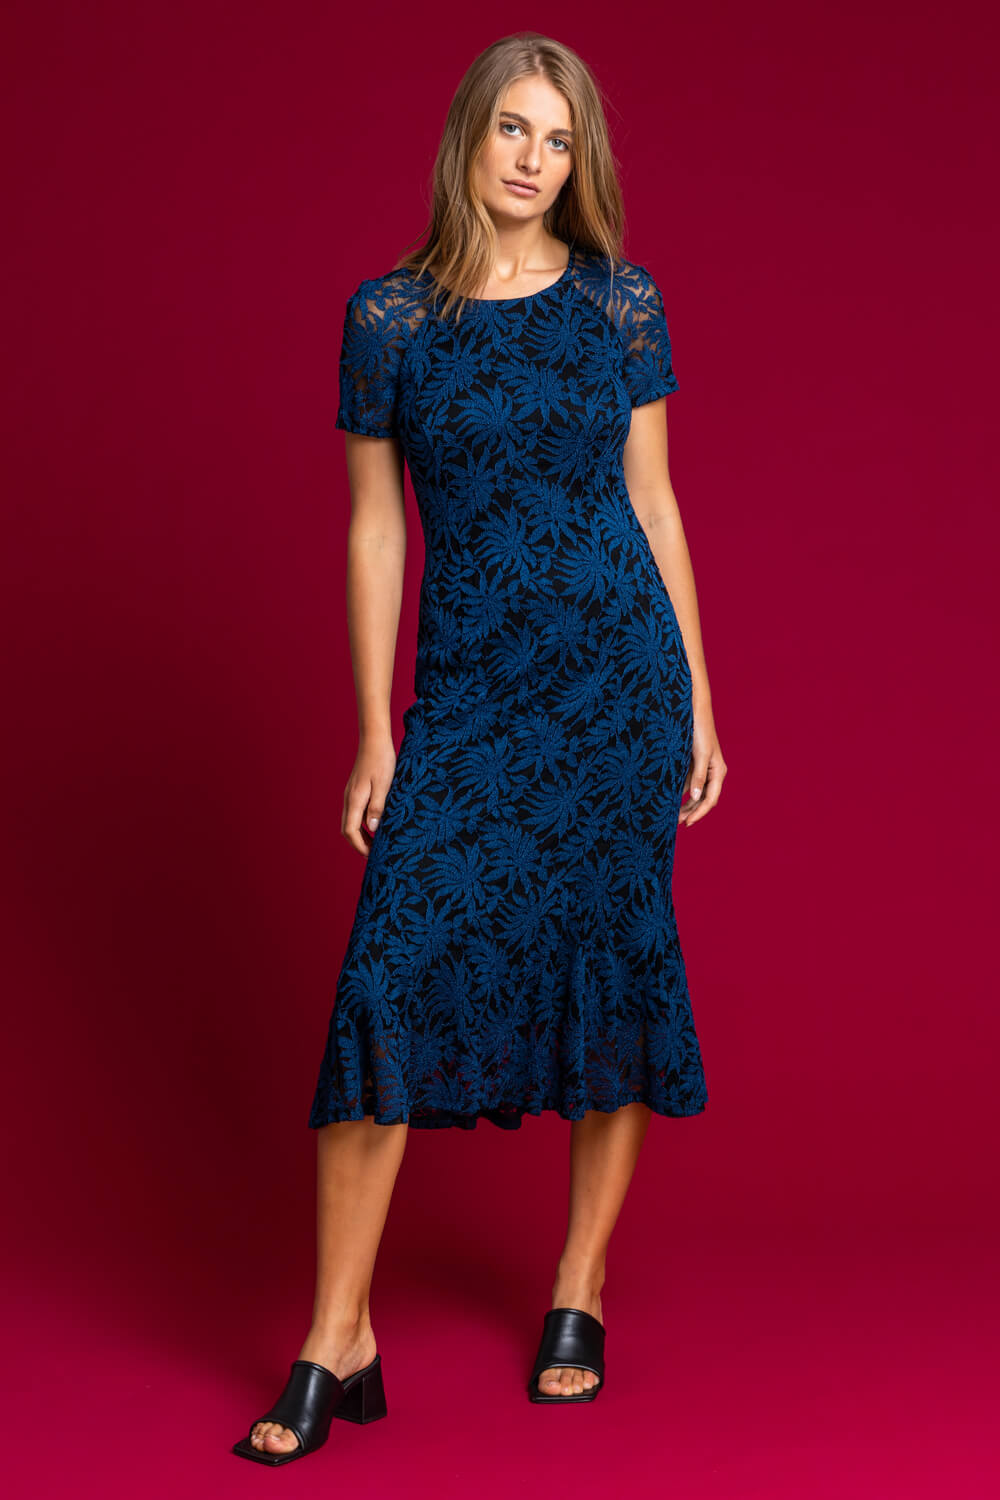 Petrol Blue Palm Print Lace Fitted Dress, Image 3 of 4